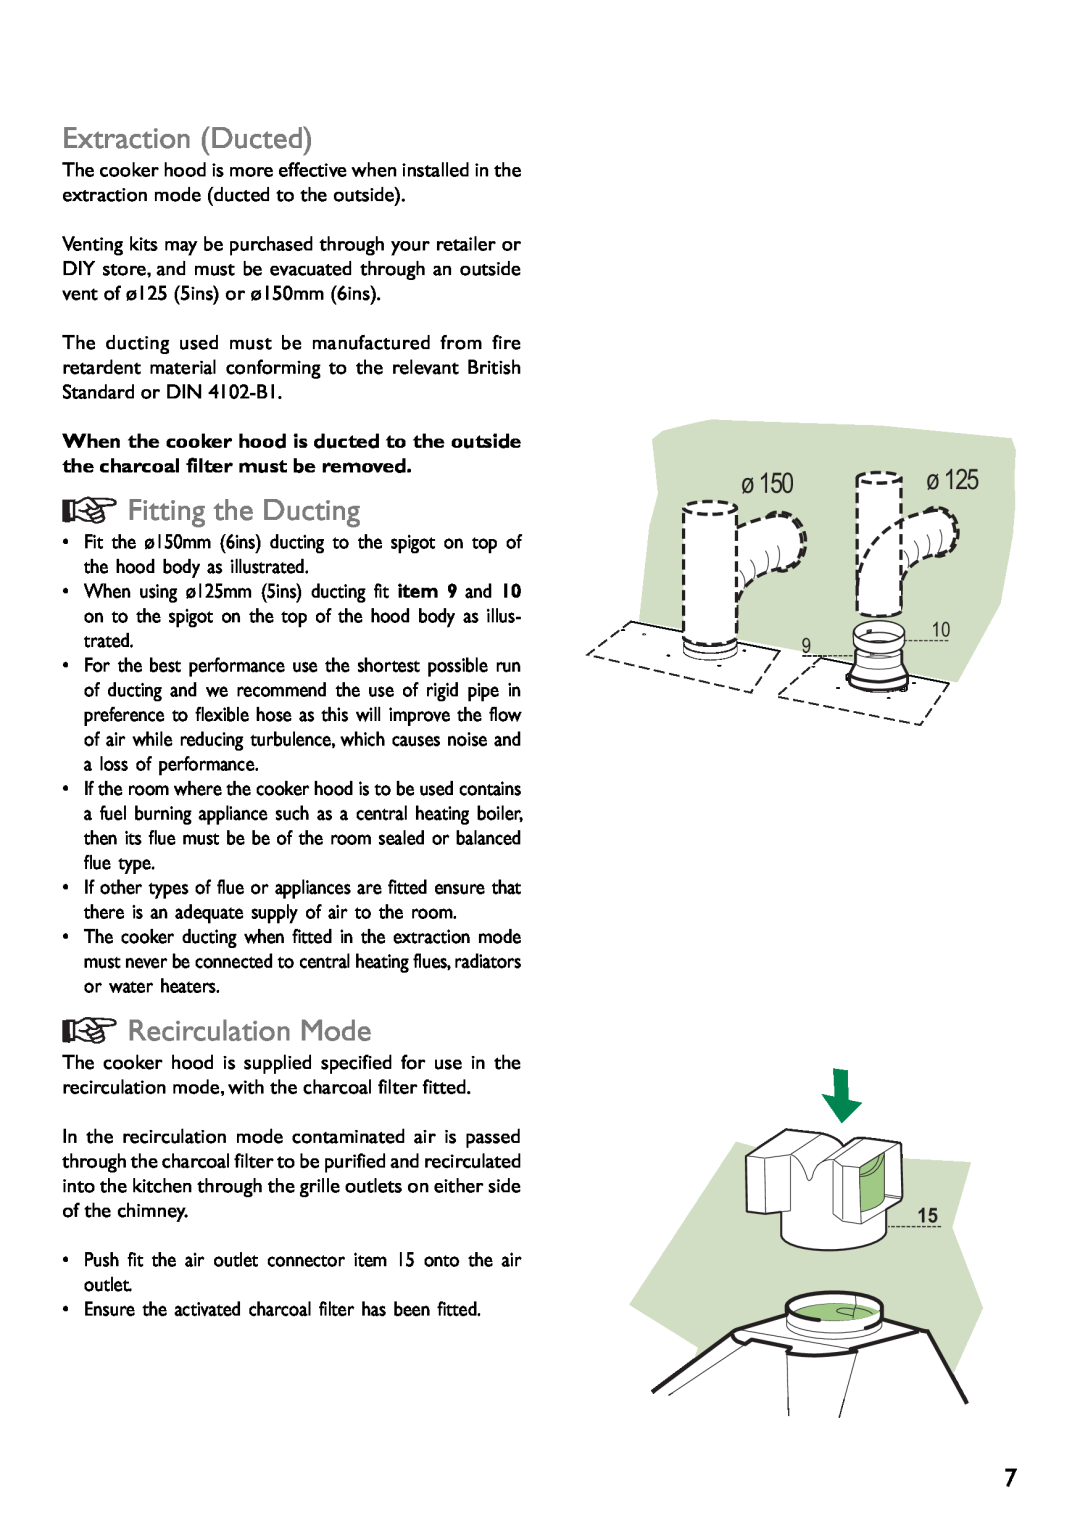 John Lewis JLBIHD601, JLBIHD902 instruction manual Extraction Ducted, Fitting the Ducting, Recirculation Mode 